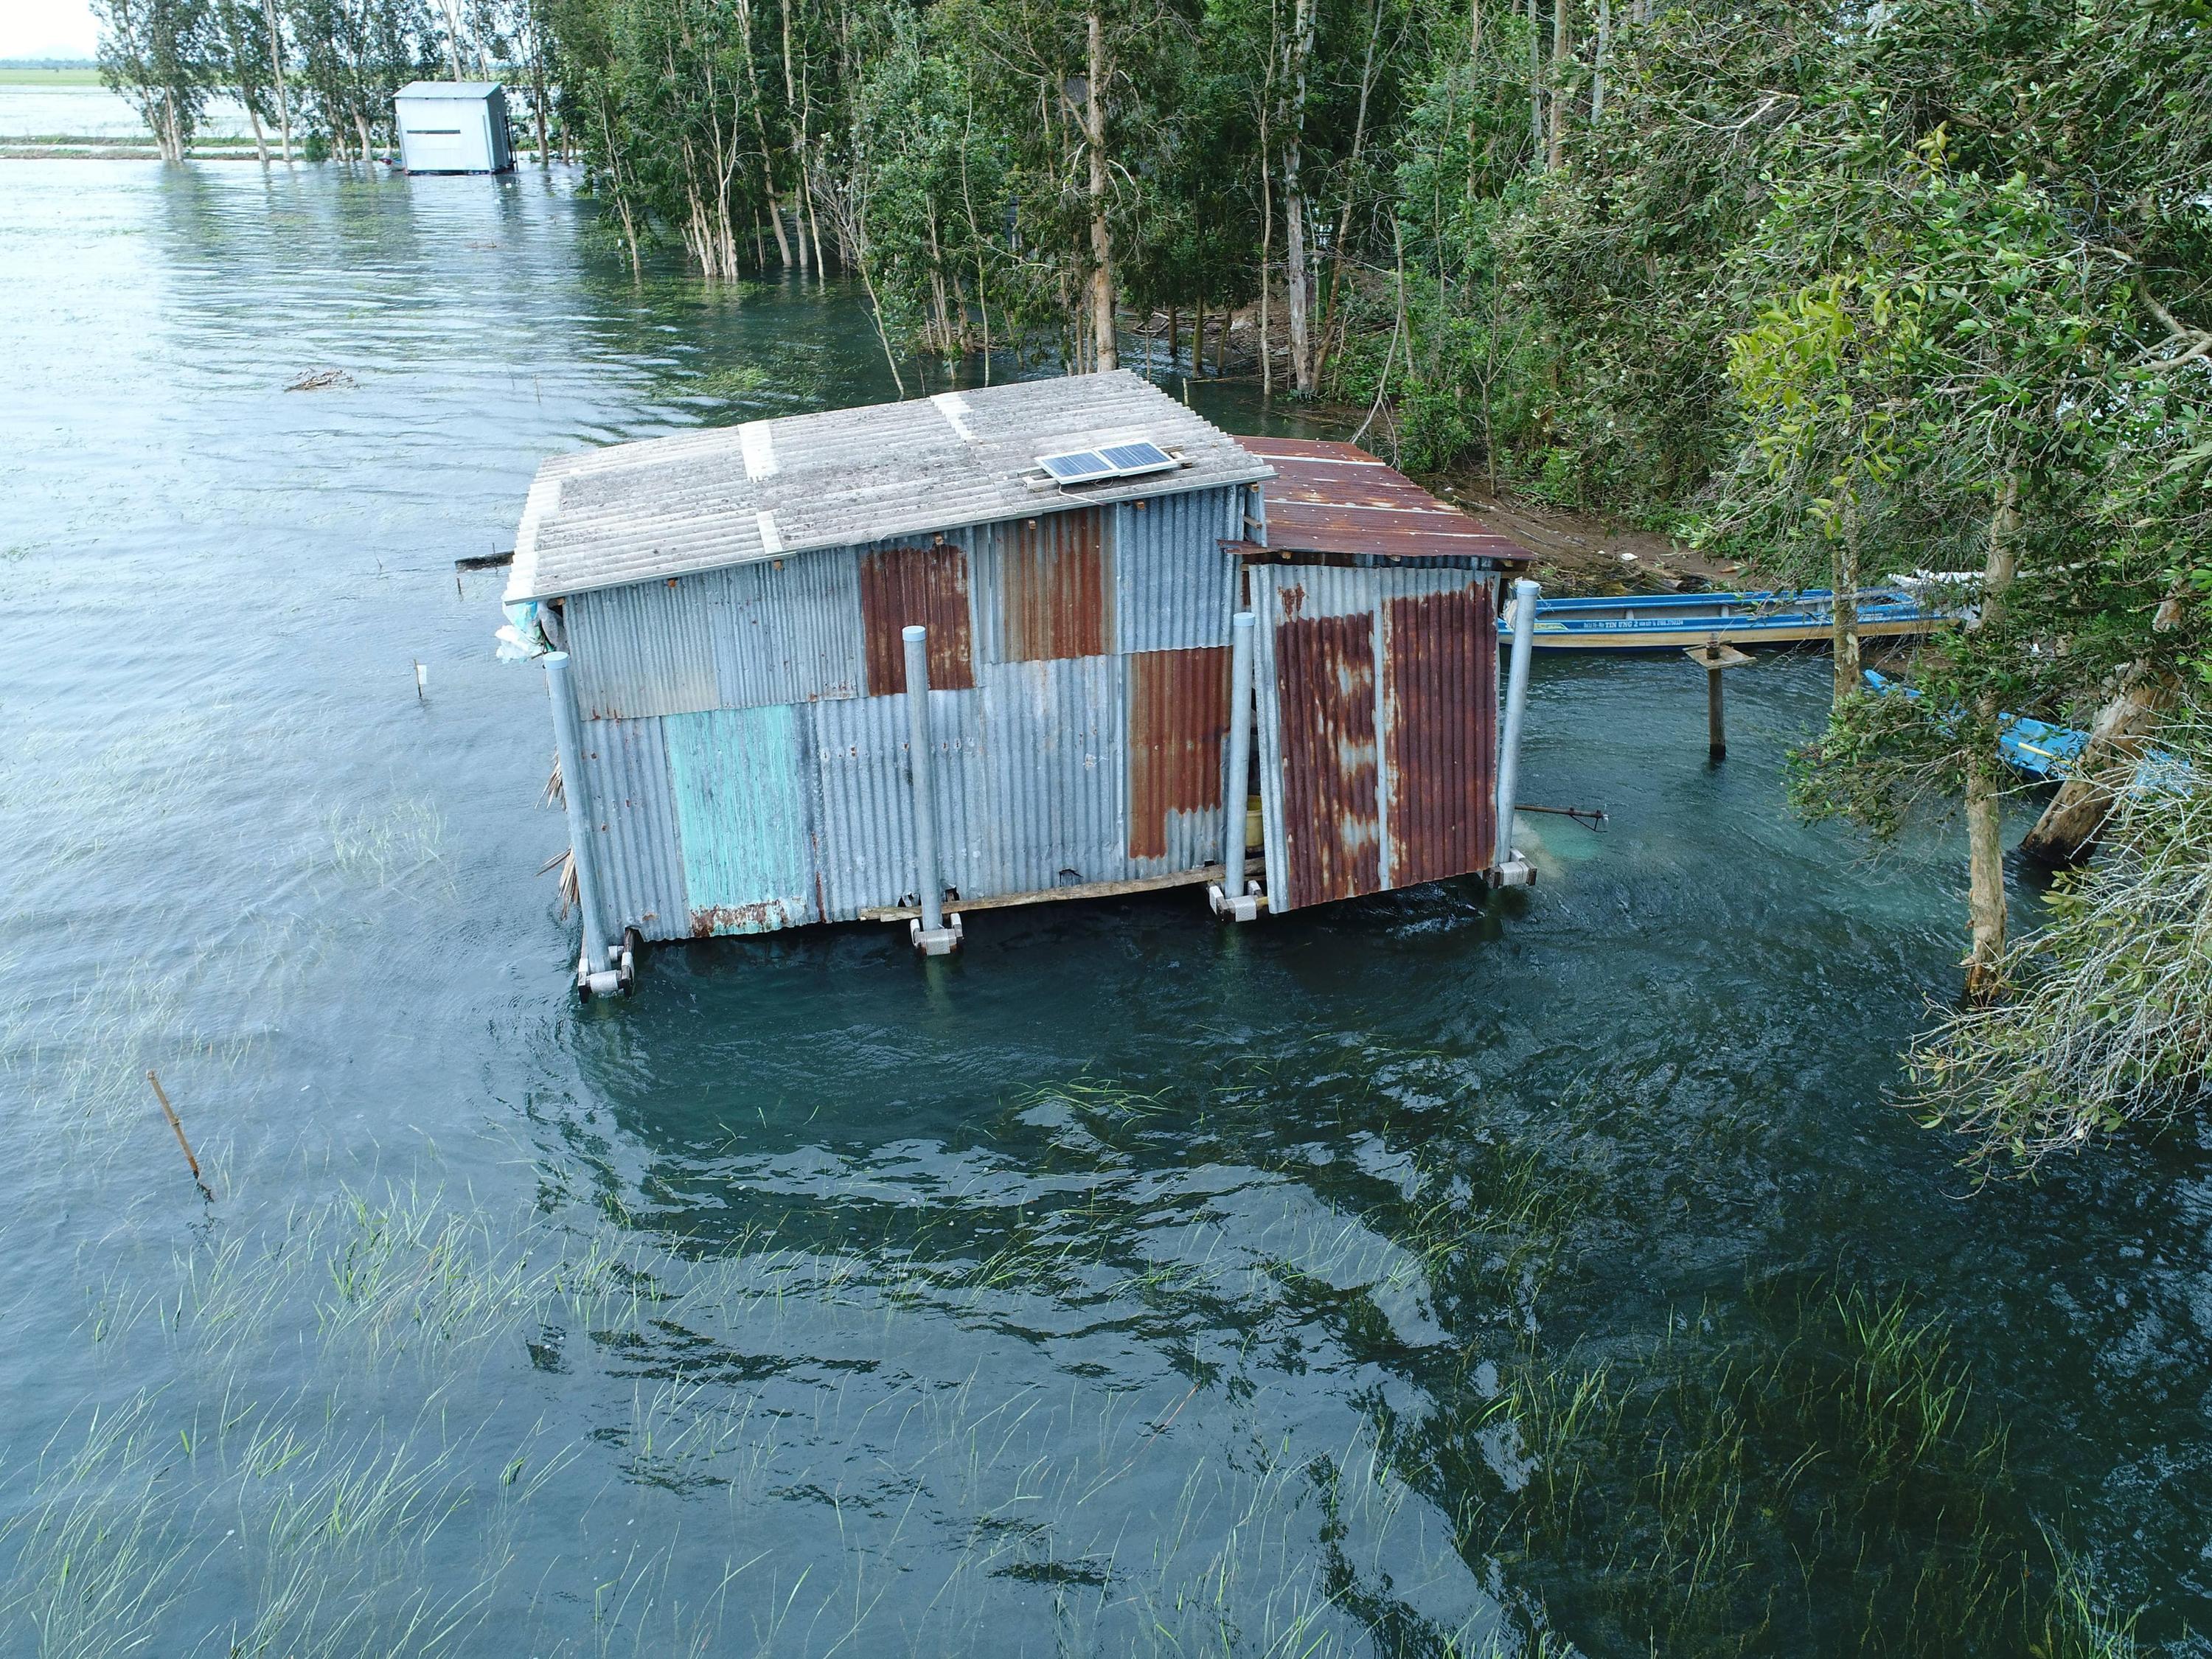 House floating on floodwater in Vietnam, August 21, 2018